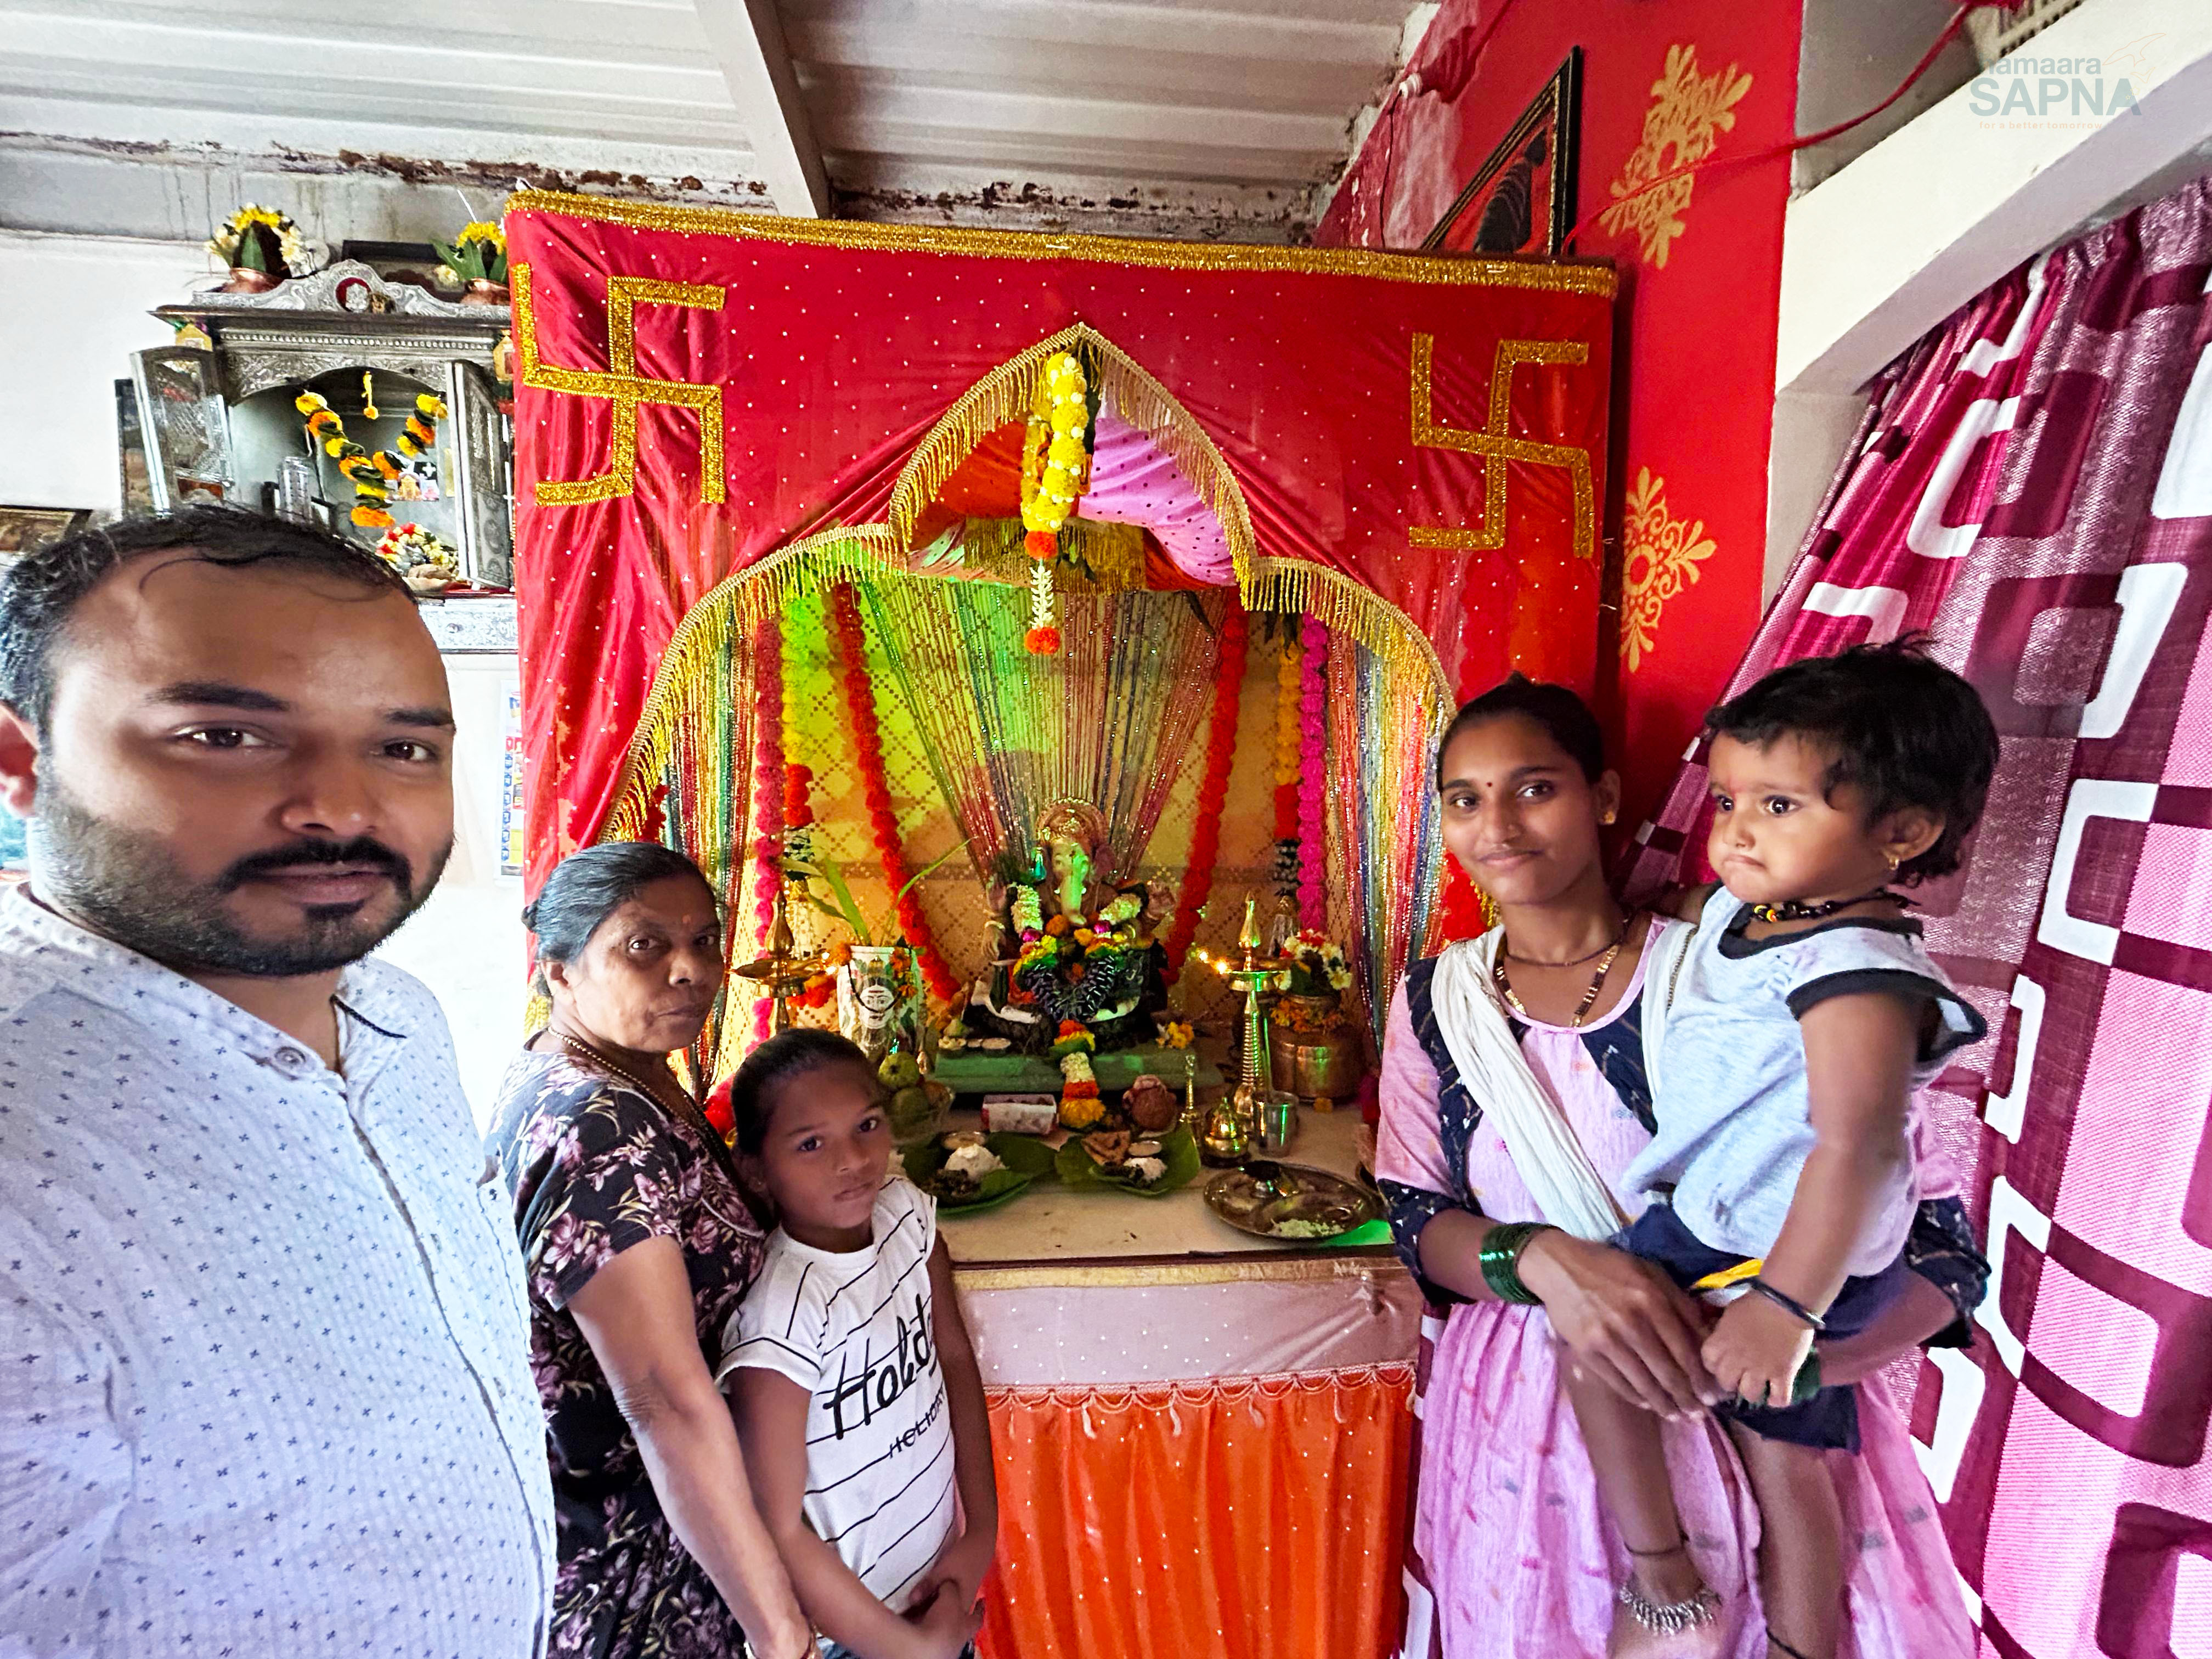 Another beneficiary finds so much place to place her Lord during the festival in their small homes. Lovely pandal.